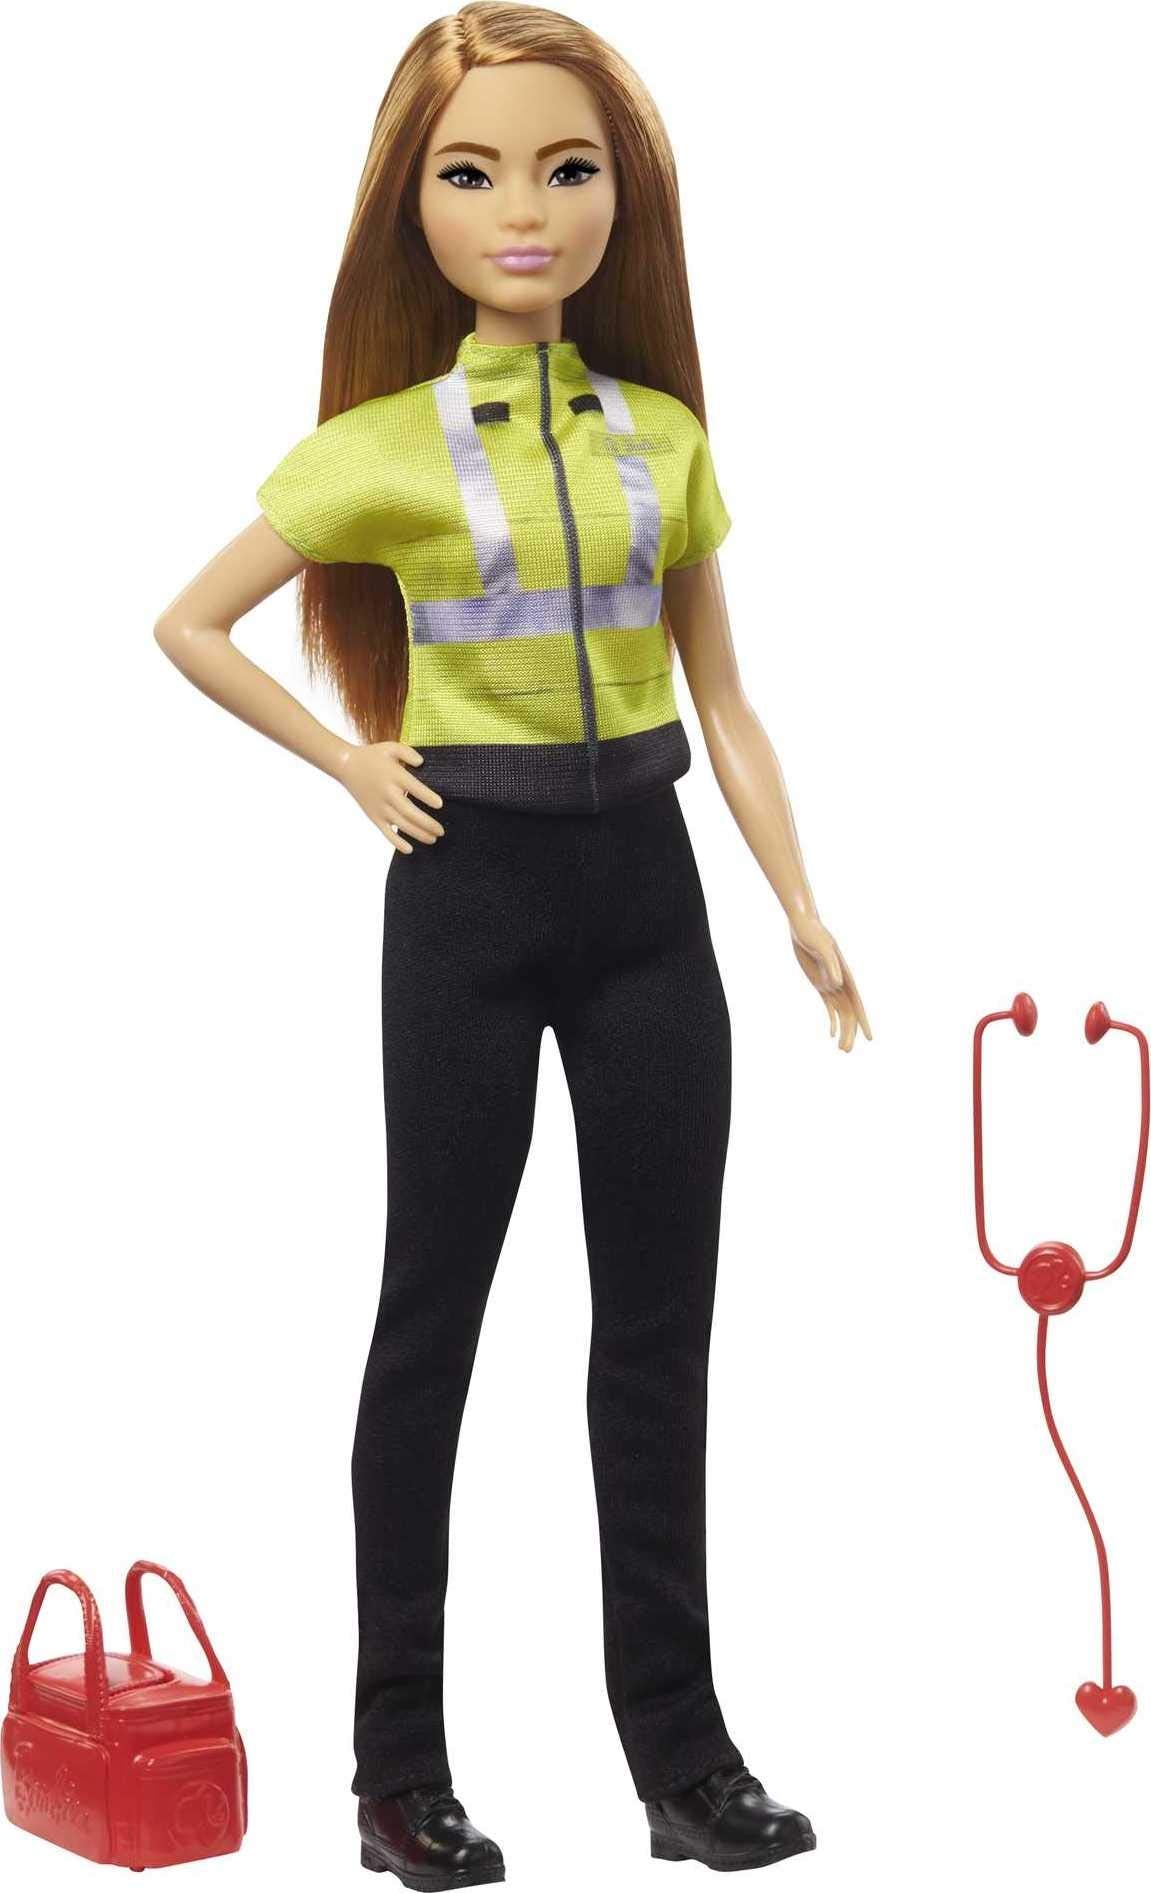 Barbie Paramedic Doll, Petite Brunette (12-in), Role-play Clothing & Accessories: Stethoscope, Medical Bag, Great Toy Gift for Ages 3 Years Old & Up